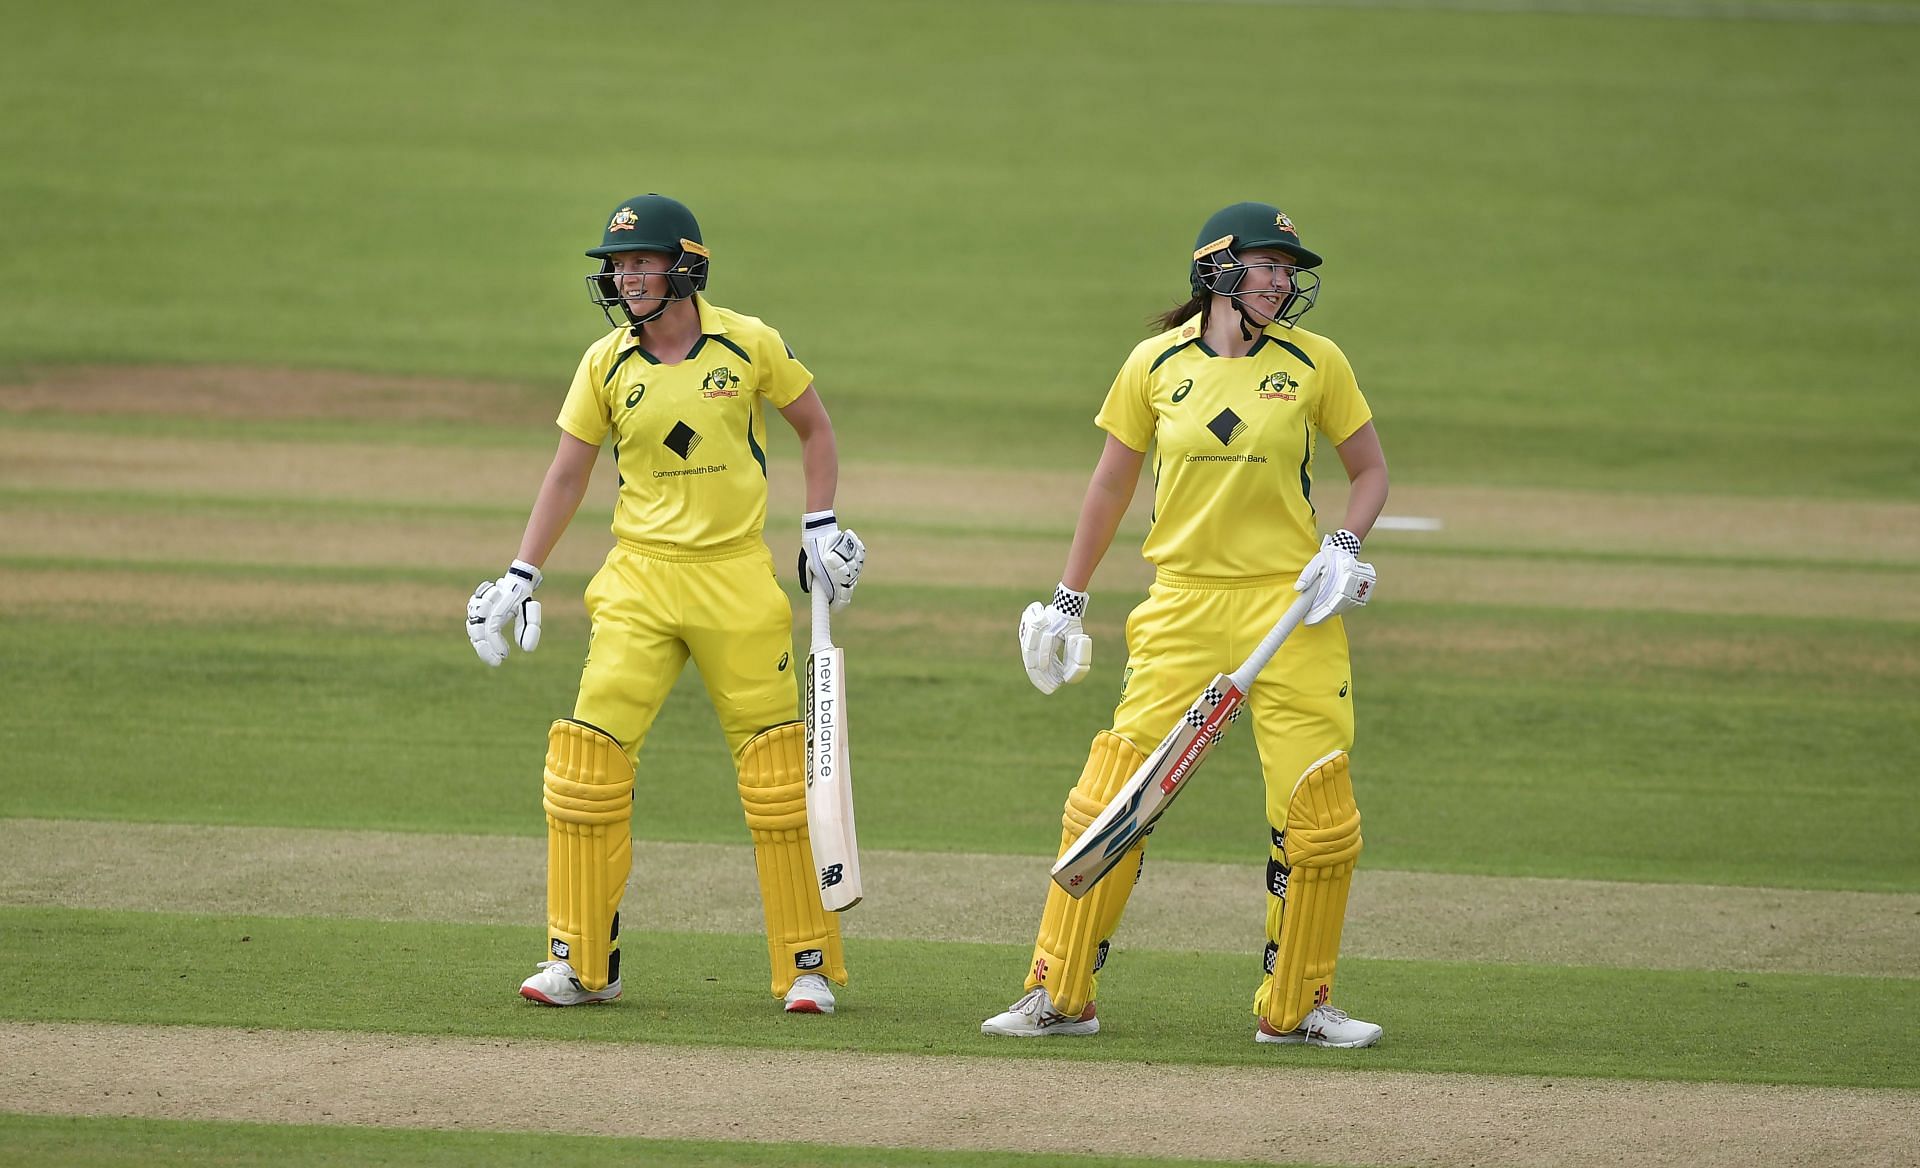 Australia Women provide a lot of viable captaincy options in this T20I Tri-Series fixture